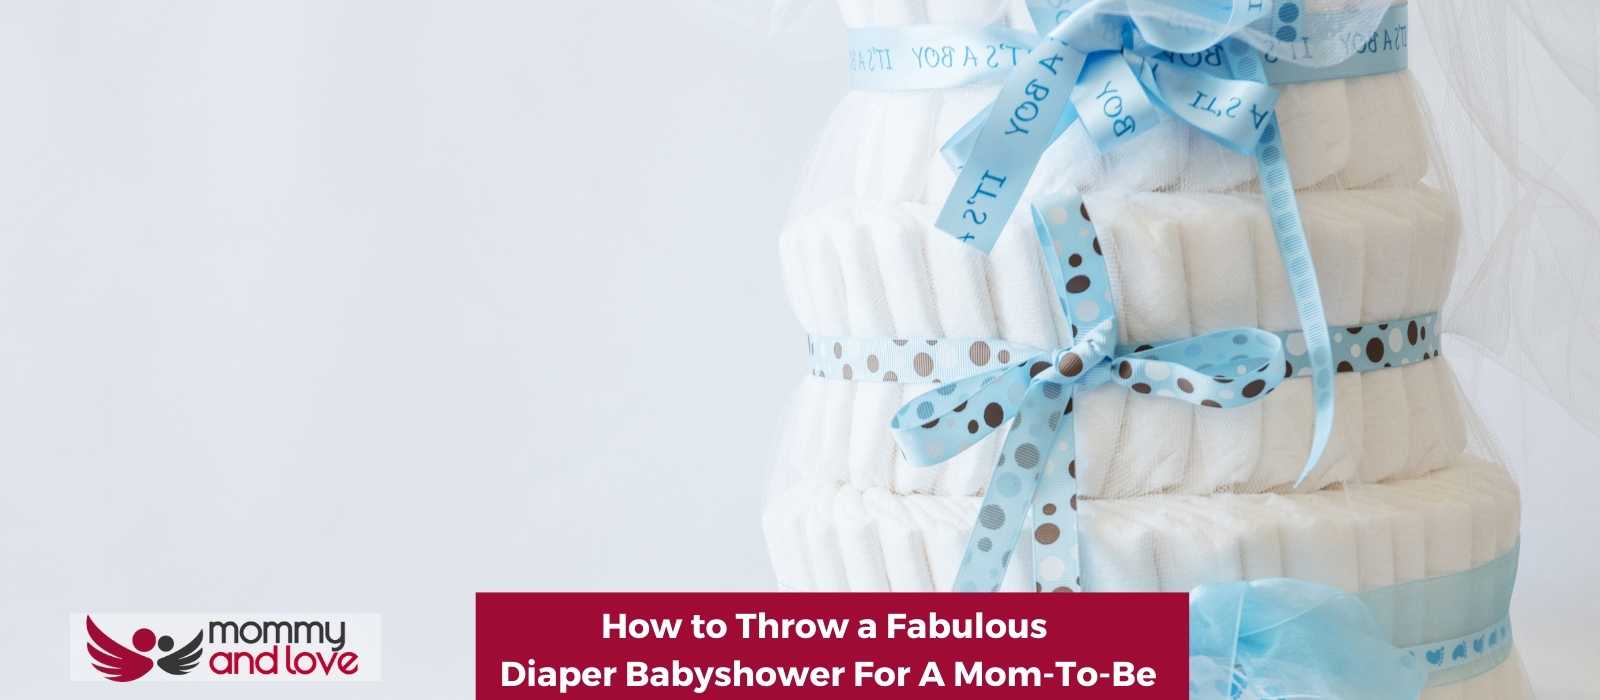 How to Throw a Fabulous Diaper Babyshower For A Mom-To-Be